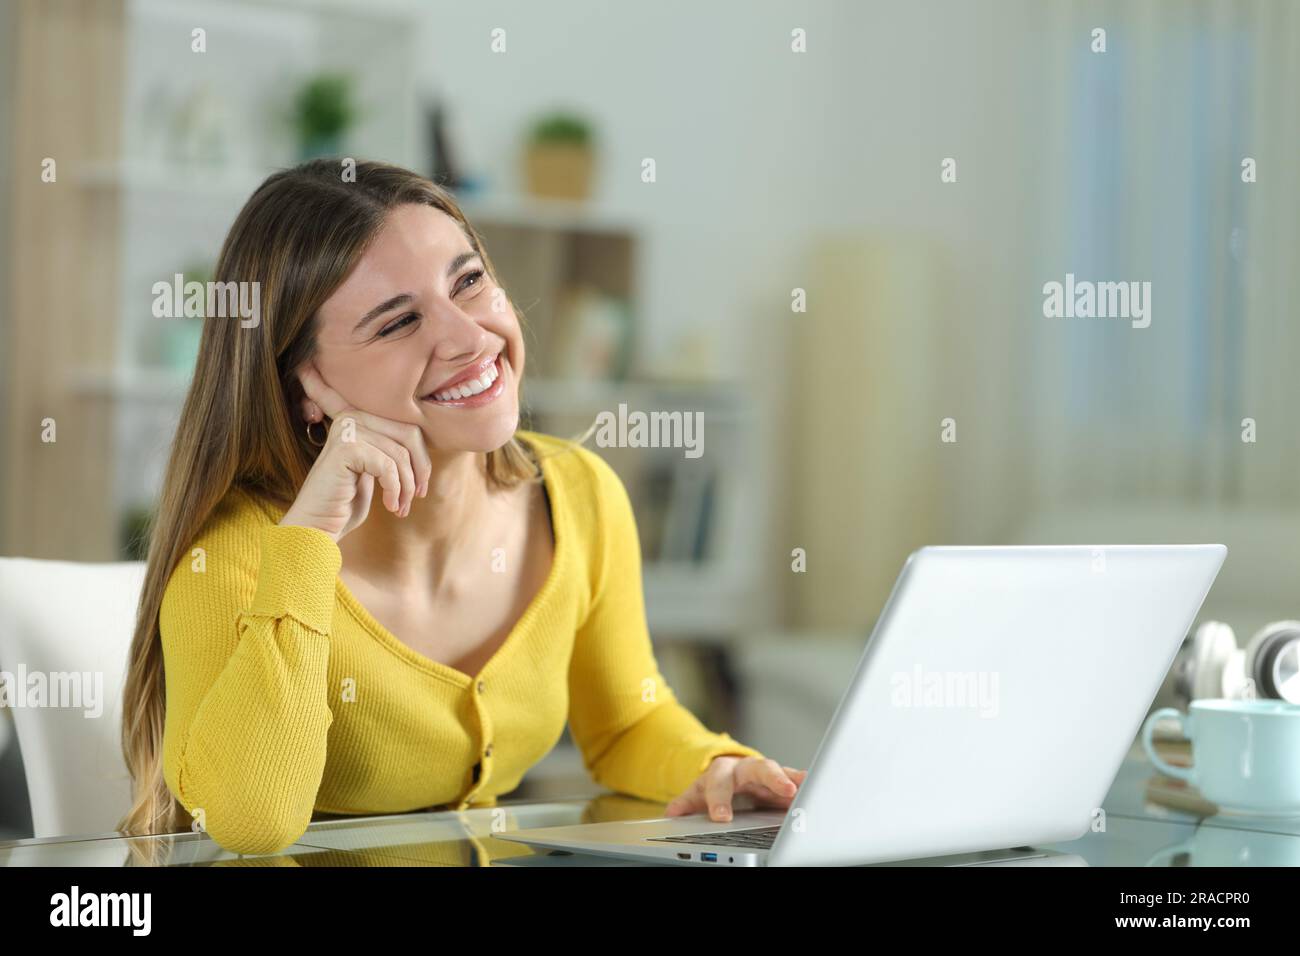 Happy woman at home dreaming looking above with a laptop Stock Photo